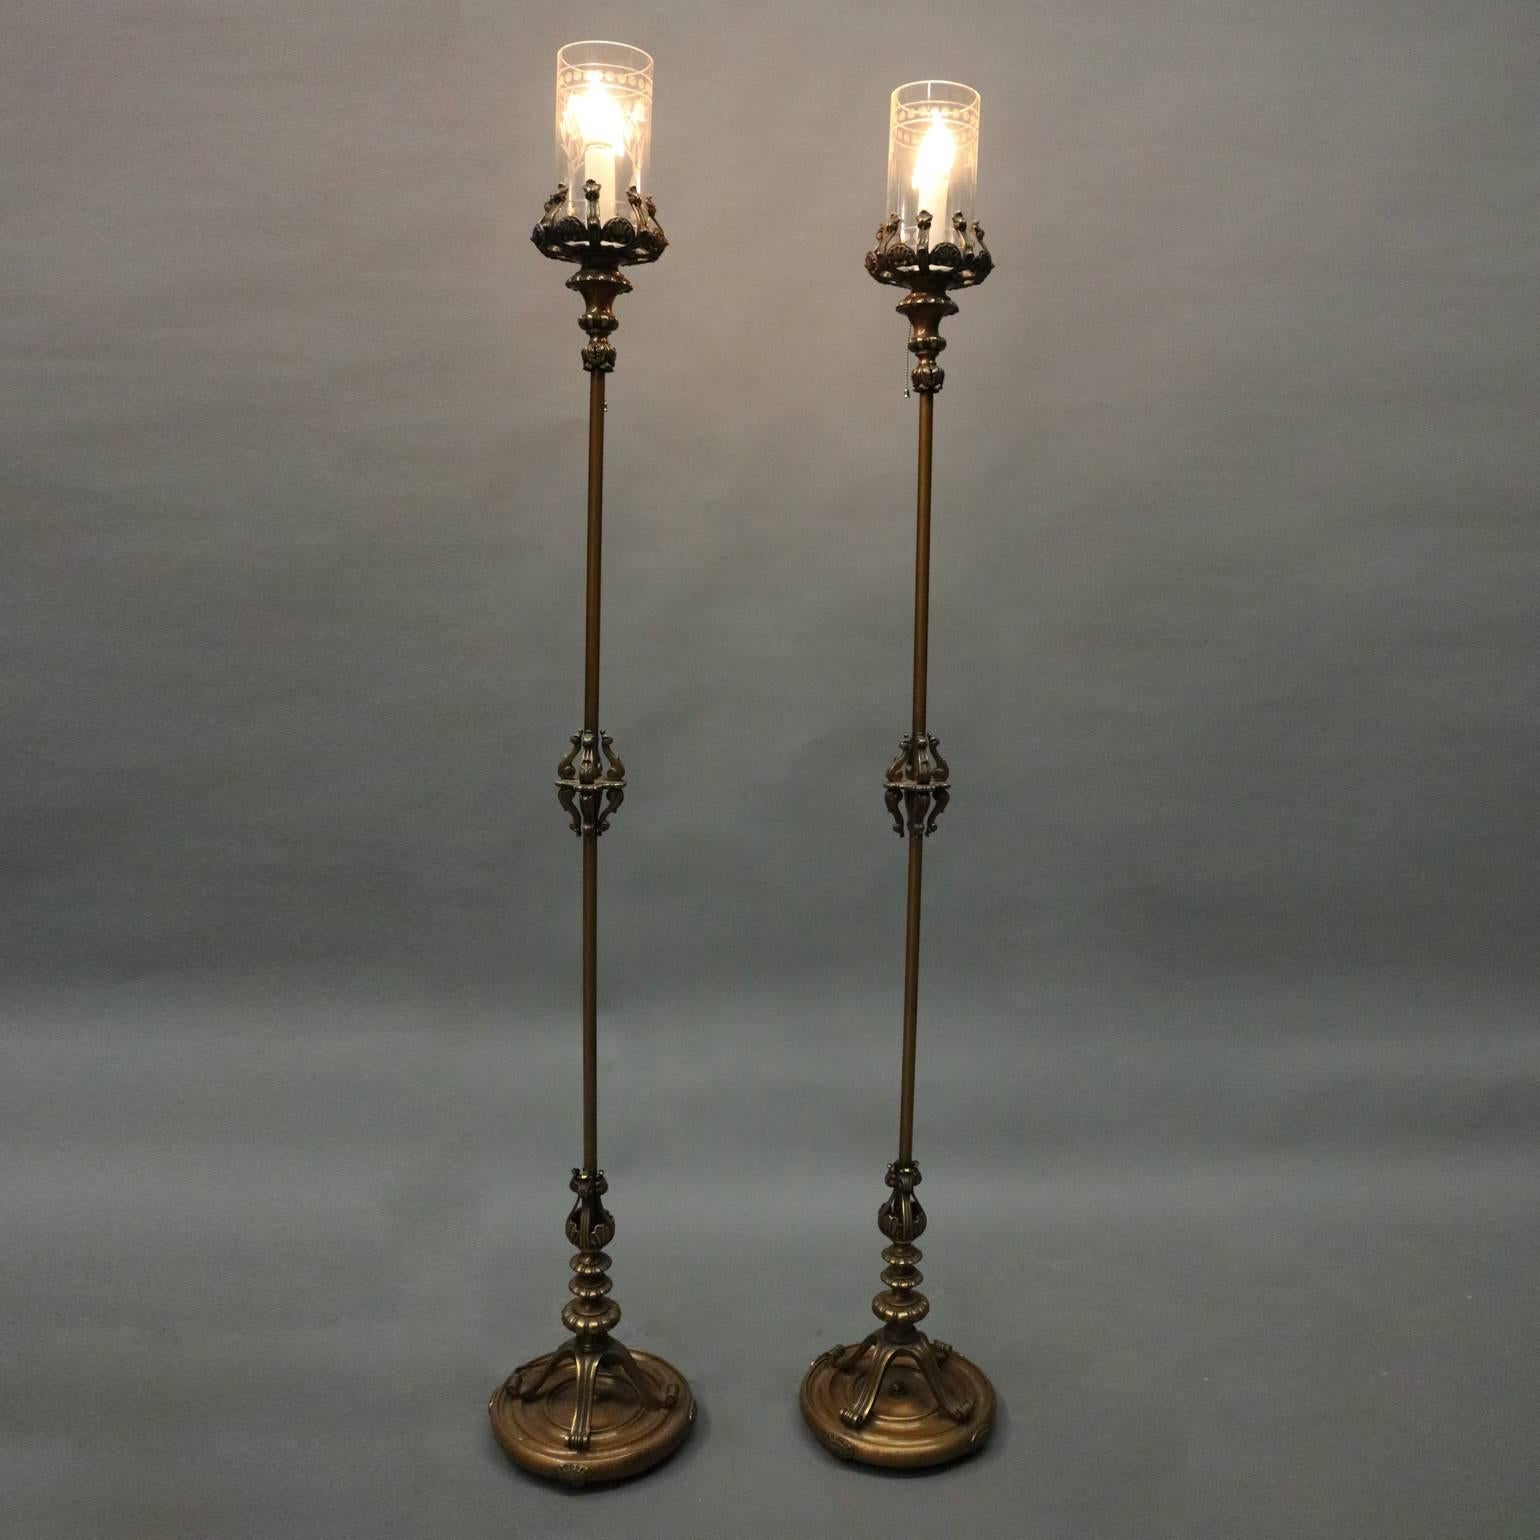 Pair of antique Handel style bronze torchiere floor lamps feature cast acanthus, scroll and egg-and-dart decoration, floral etched glass cylinder shades, newly re-wired, circa 1920

Measures: 63.5" H x 10" diam base, 3.75" diam